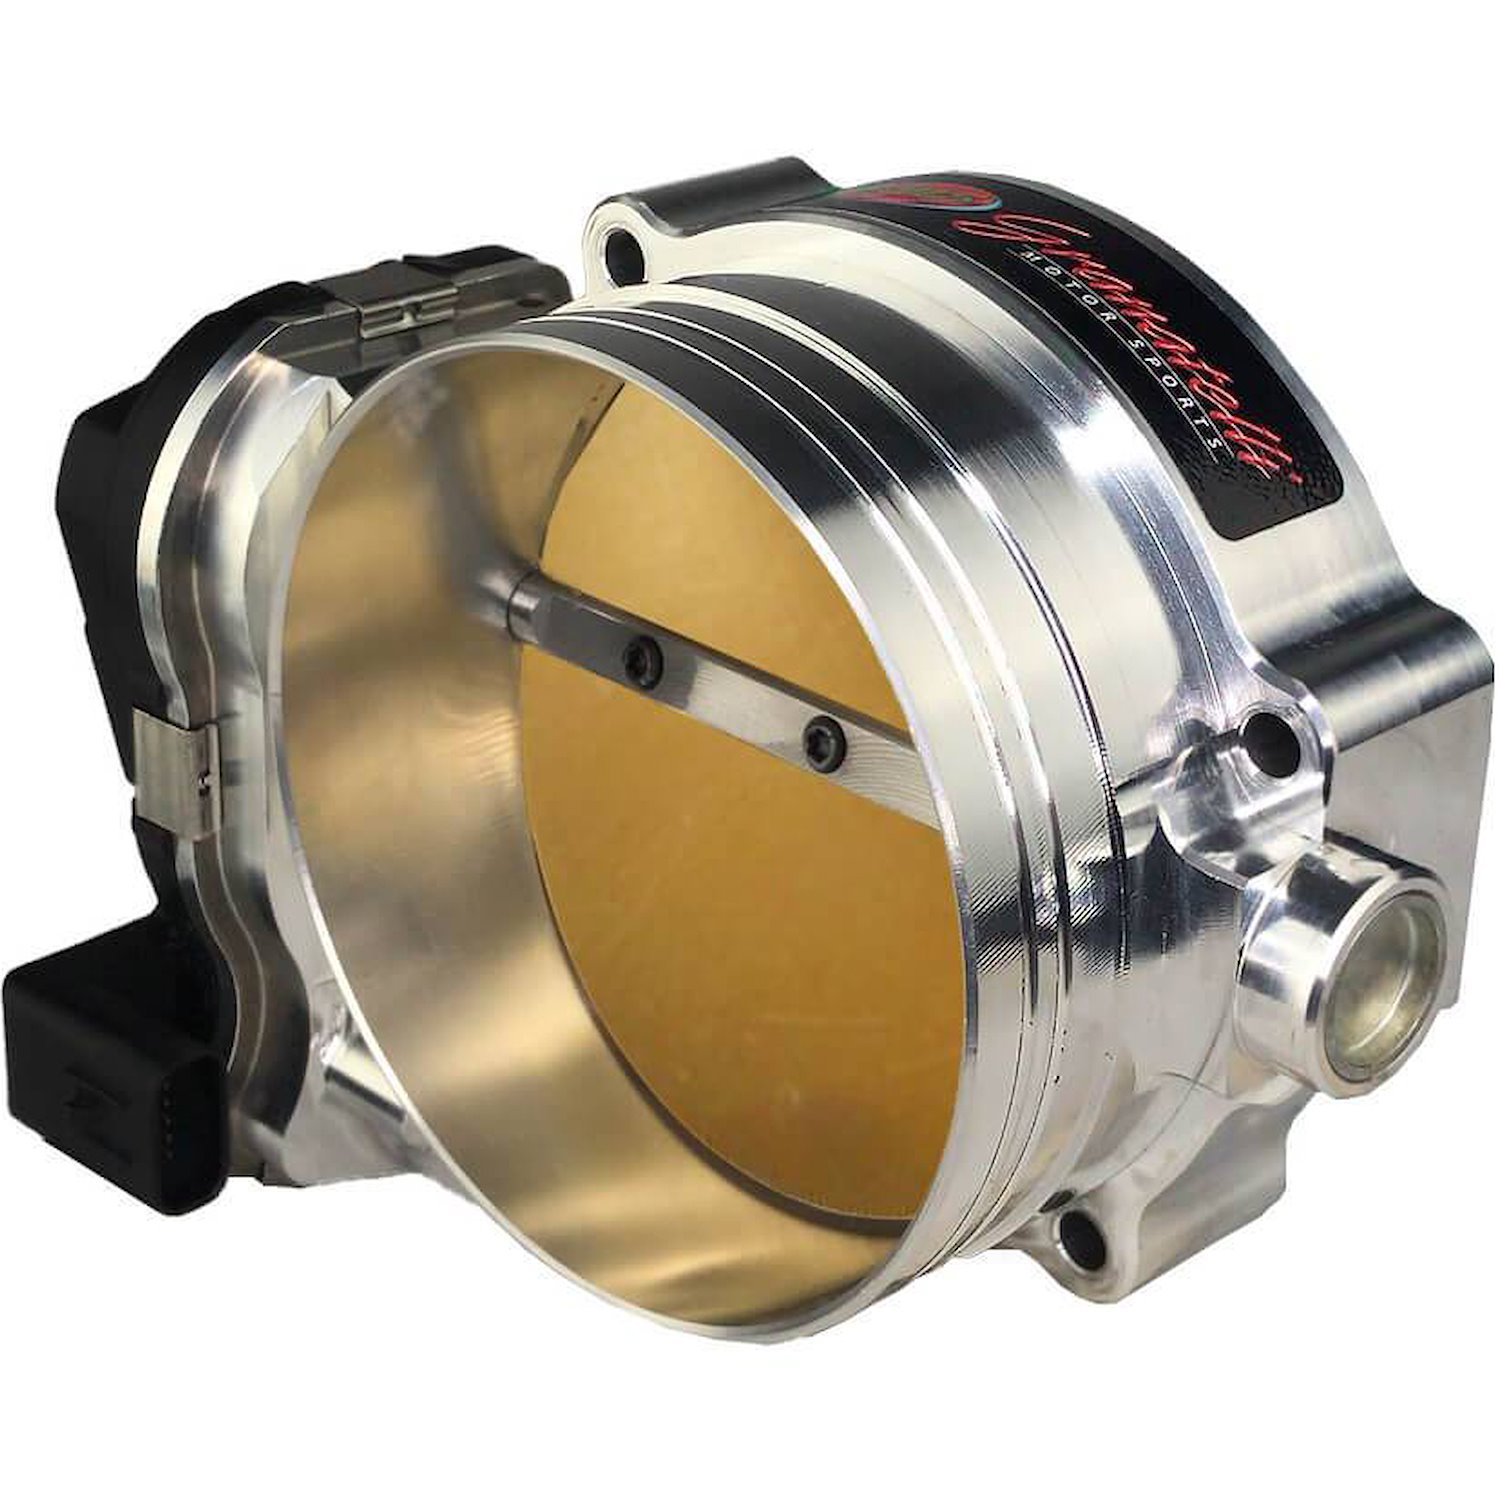 Race Drive-By-Wire 105 mm Throttle Body for Dodge